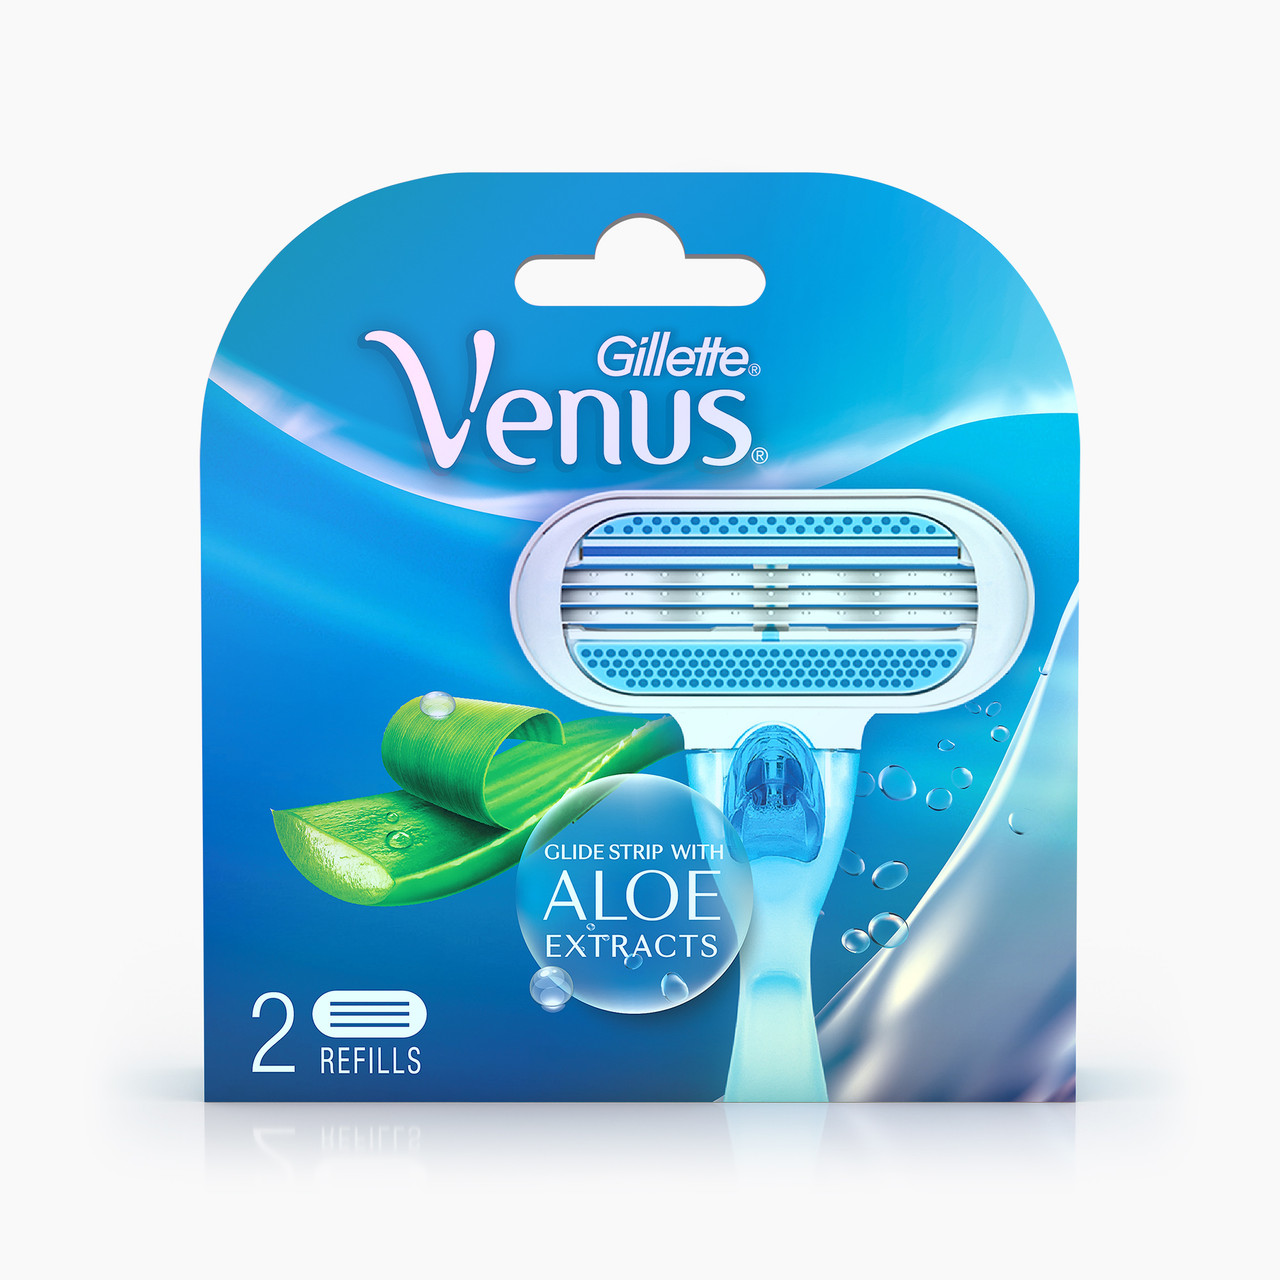 Original Women Razor Blades for Gillette Venus Razor Girl Body Hair Removal  Shaver 3 Layers with Soap Replacement Shaving Blades  Price history   Review  AliExpress Seller  GilletteAuthorization products Store   Alitoolsio